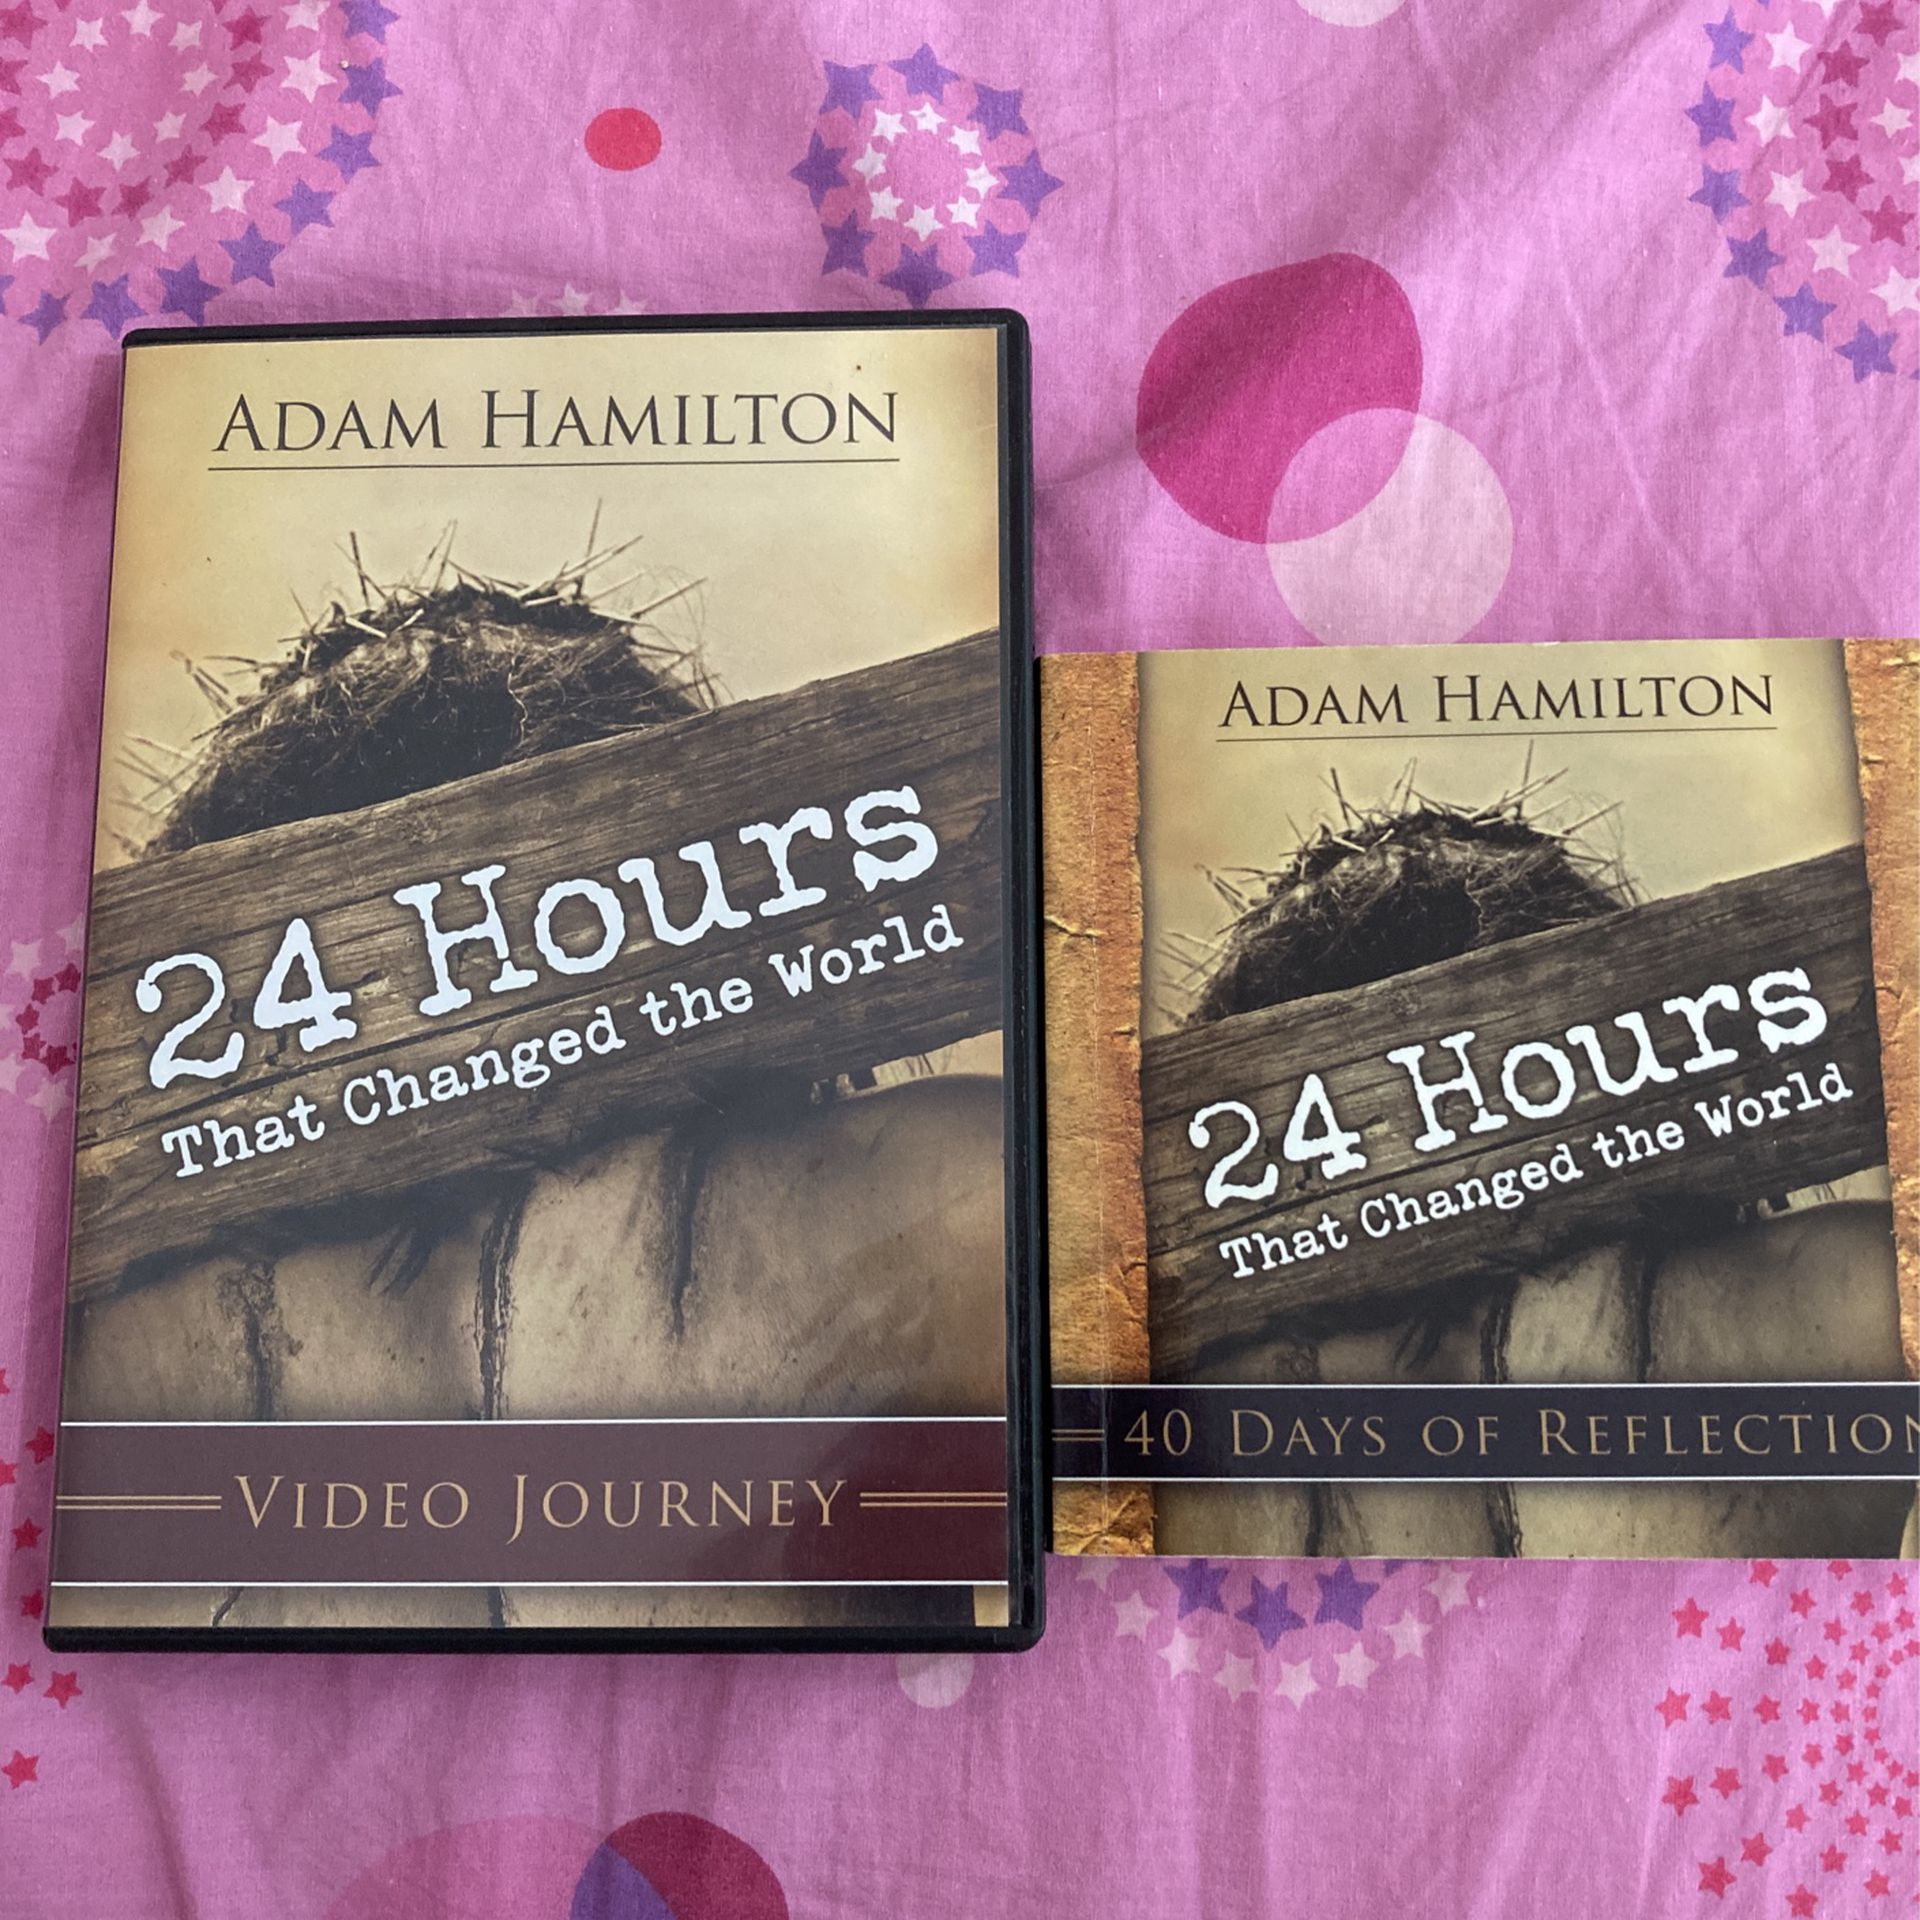 25 Hours That Changed The World DVD Book and Leader’s Guide